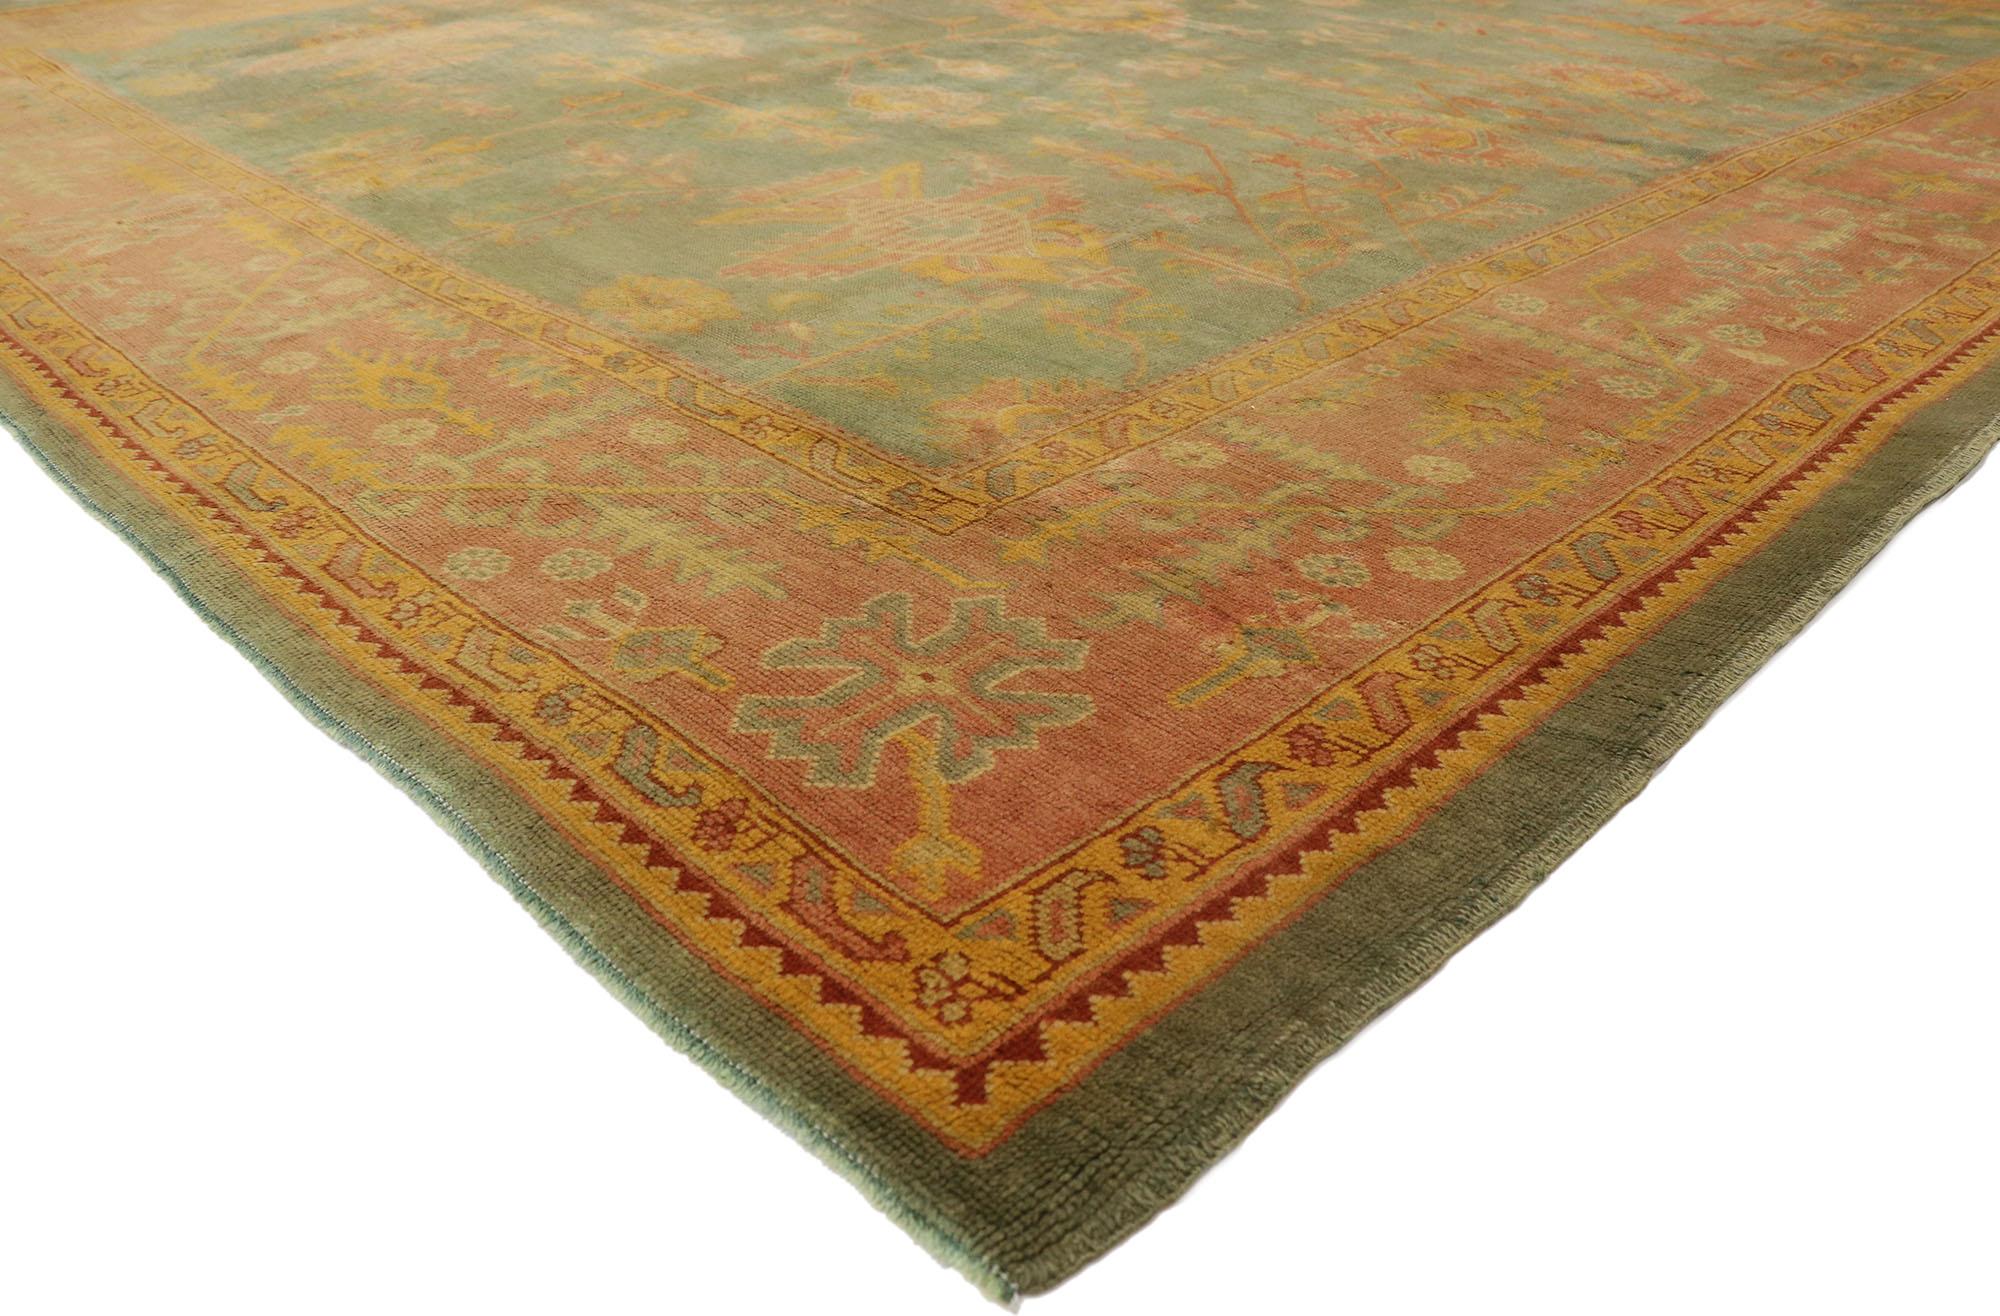 76747 Antique Turkish Oushak Rug, 10'09 x 11'09. Turkish Oushak rugs, originating from the Oushak region in Western Turkey, are renowned for their intricate designs, soft color palettes, and high-quality wool. Characterized by bold motifs, muted